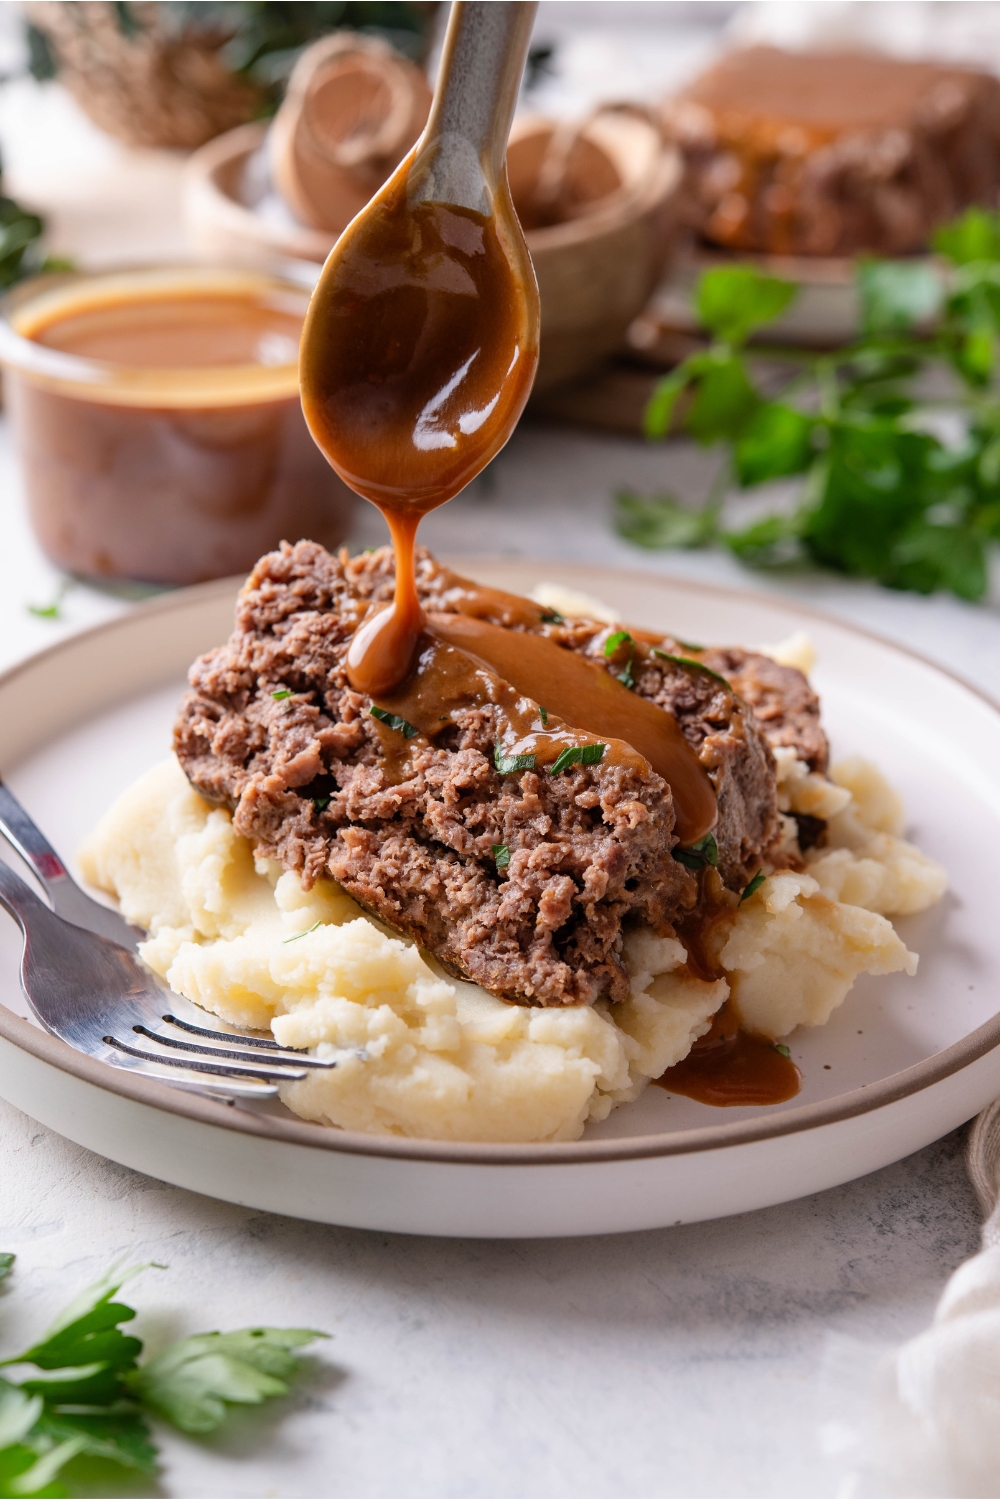 A plate with meatloaf served on mashed potatoes being topped with brown gravy.